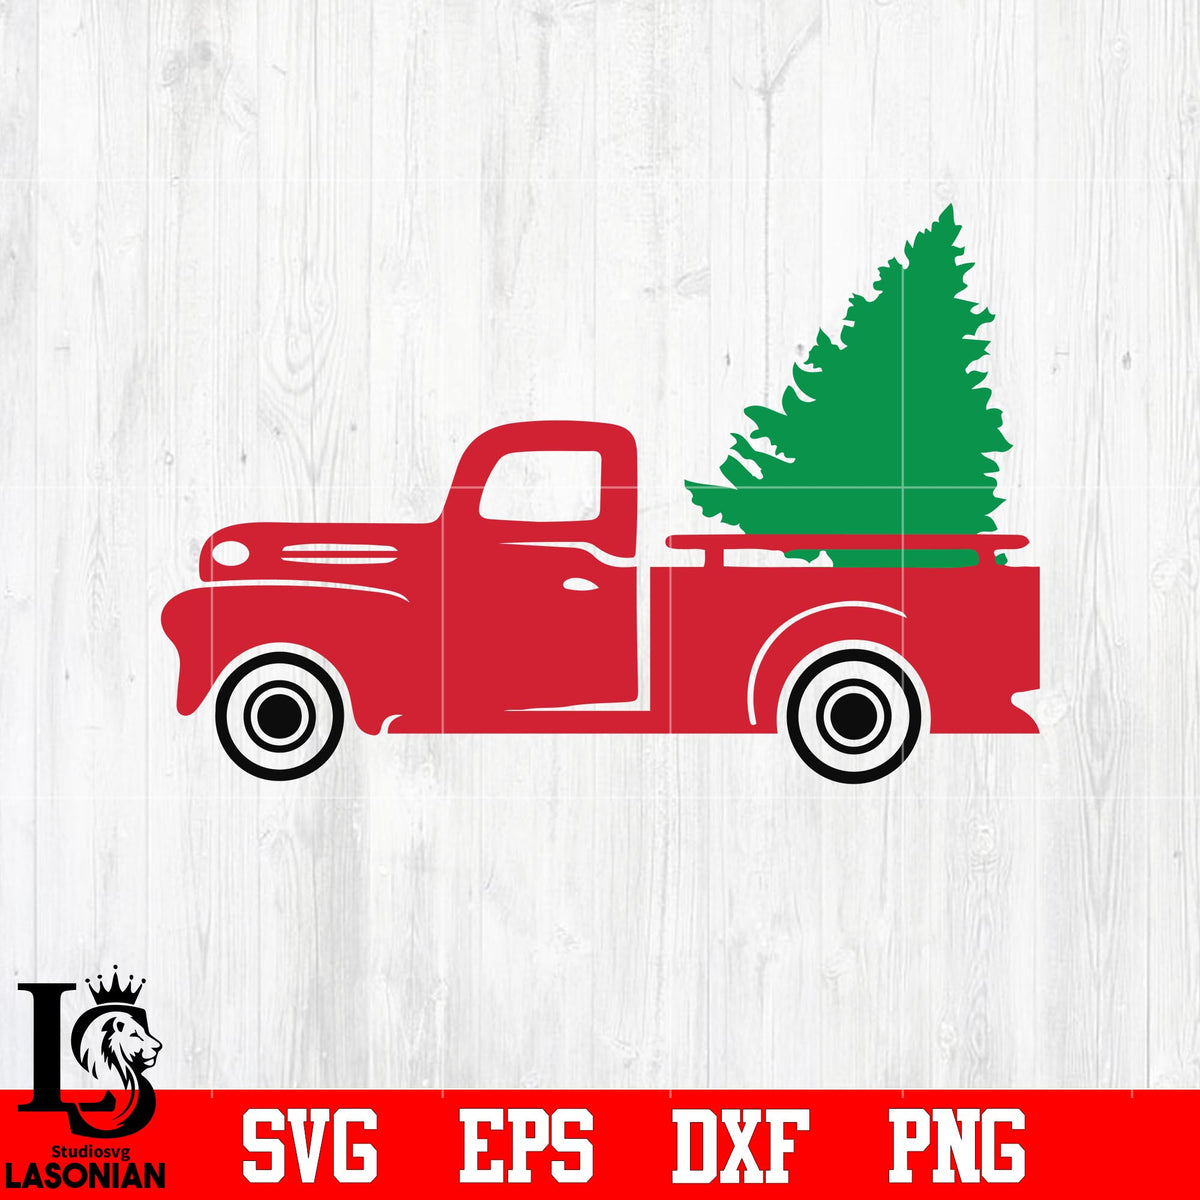 red-truck-christmas-tree-svg-eps-dxf-png-file-lasoniansvg